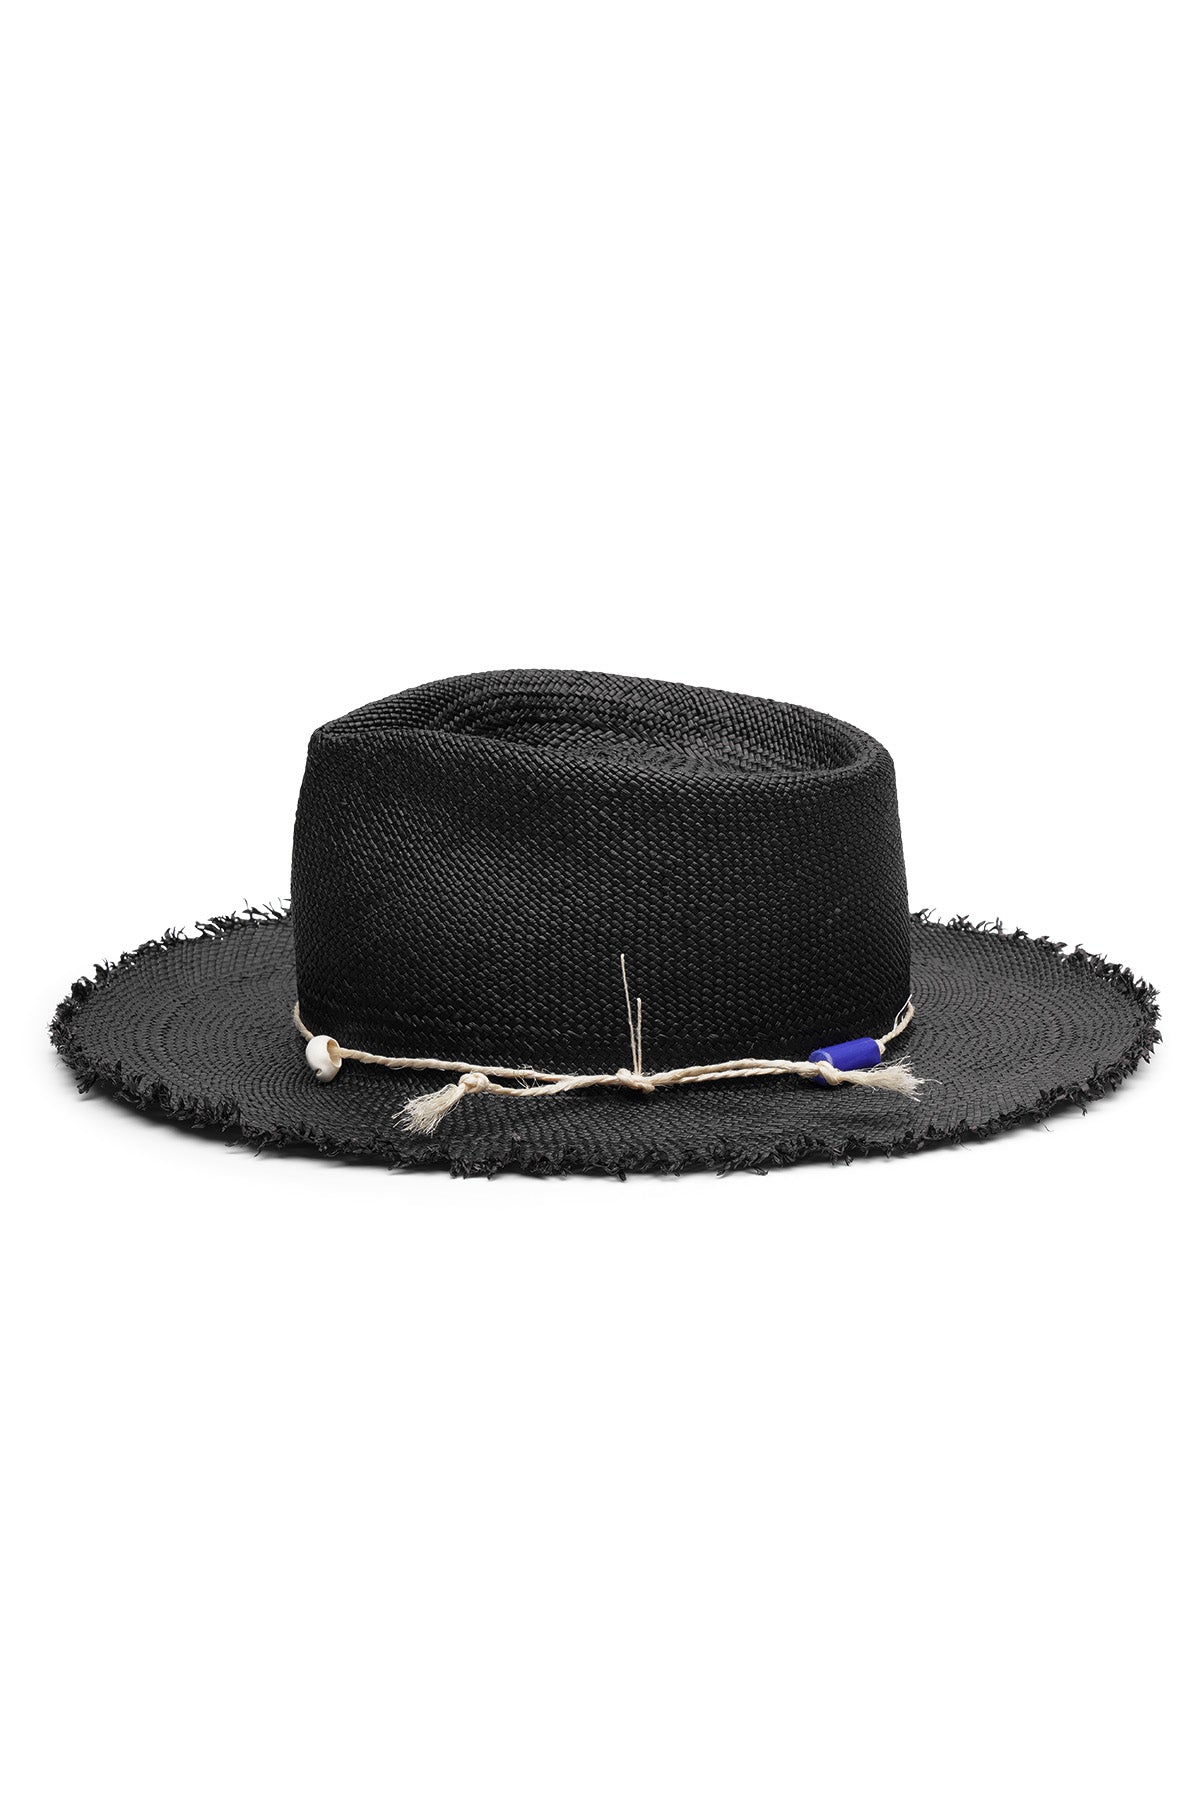 Unisex black straw fedora with wide frayed brim, teardrop crease, tied rope, beads, and seashell detail, handcrafted by SoonNoon in Stockholm